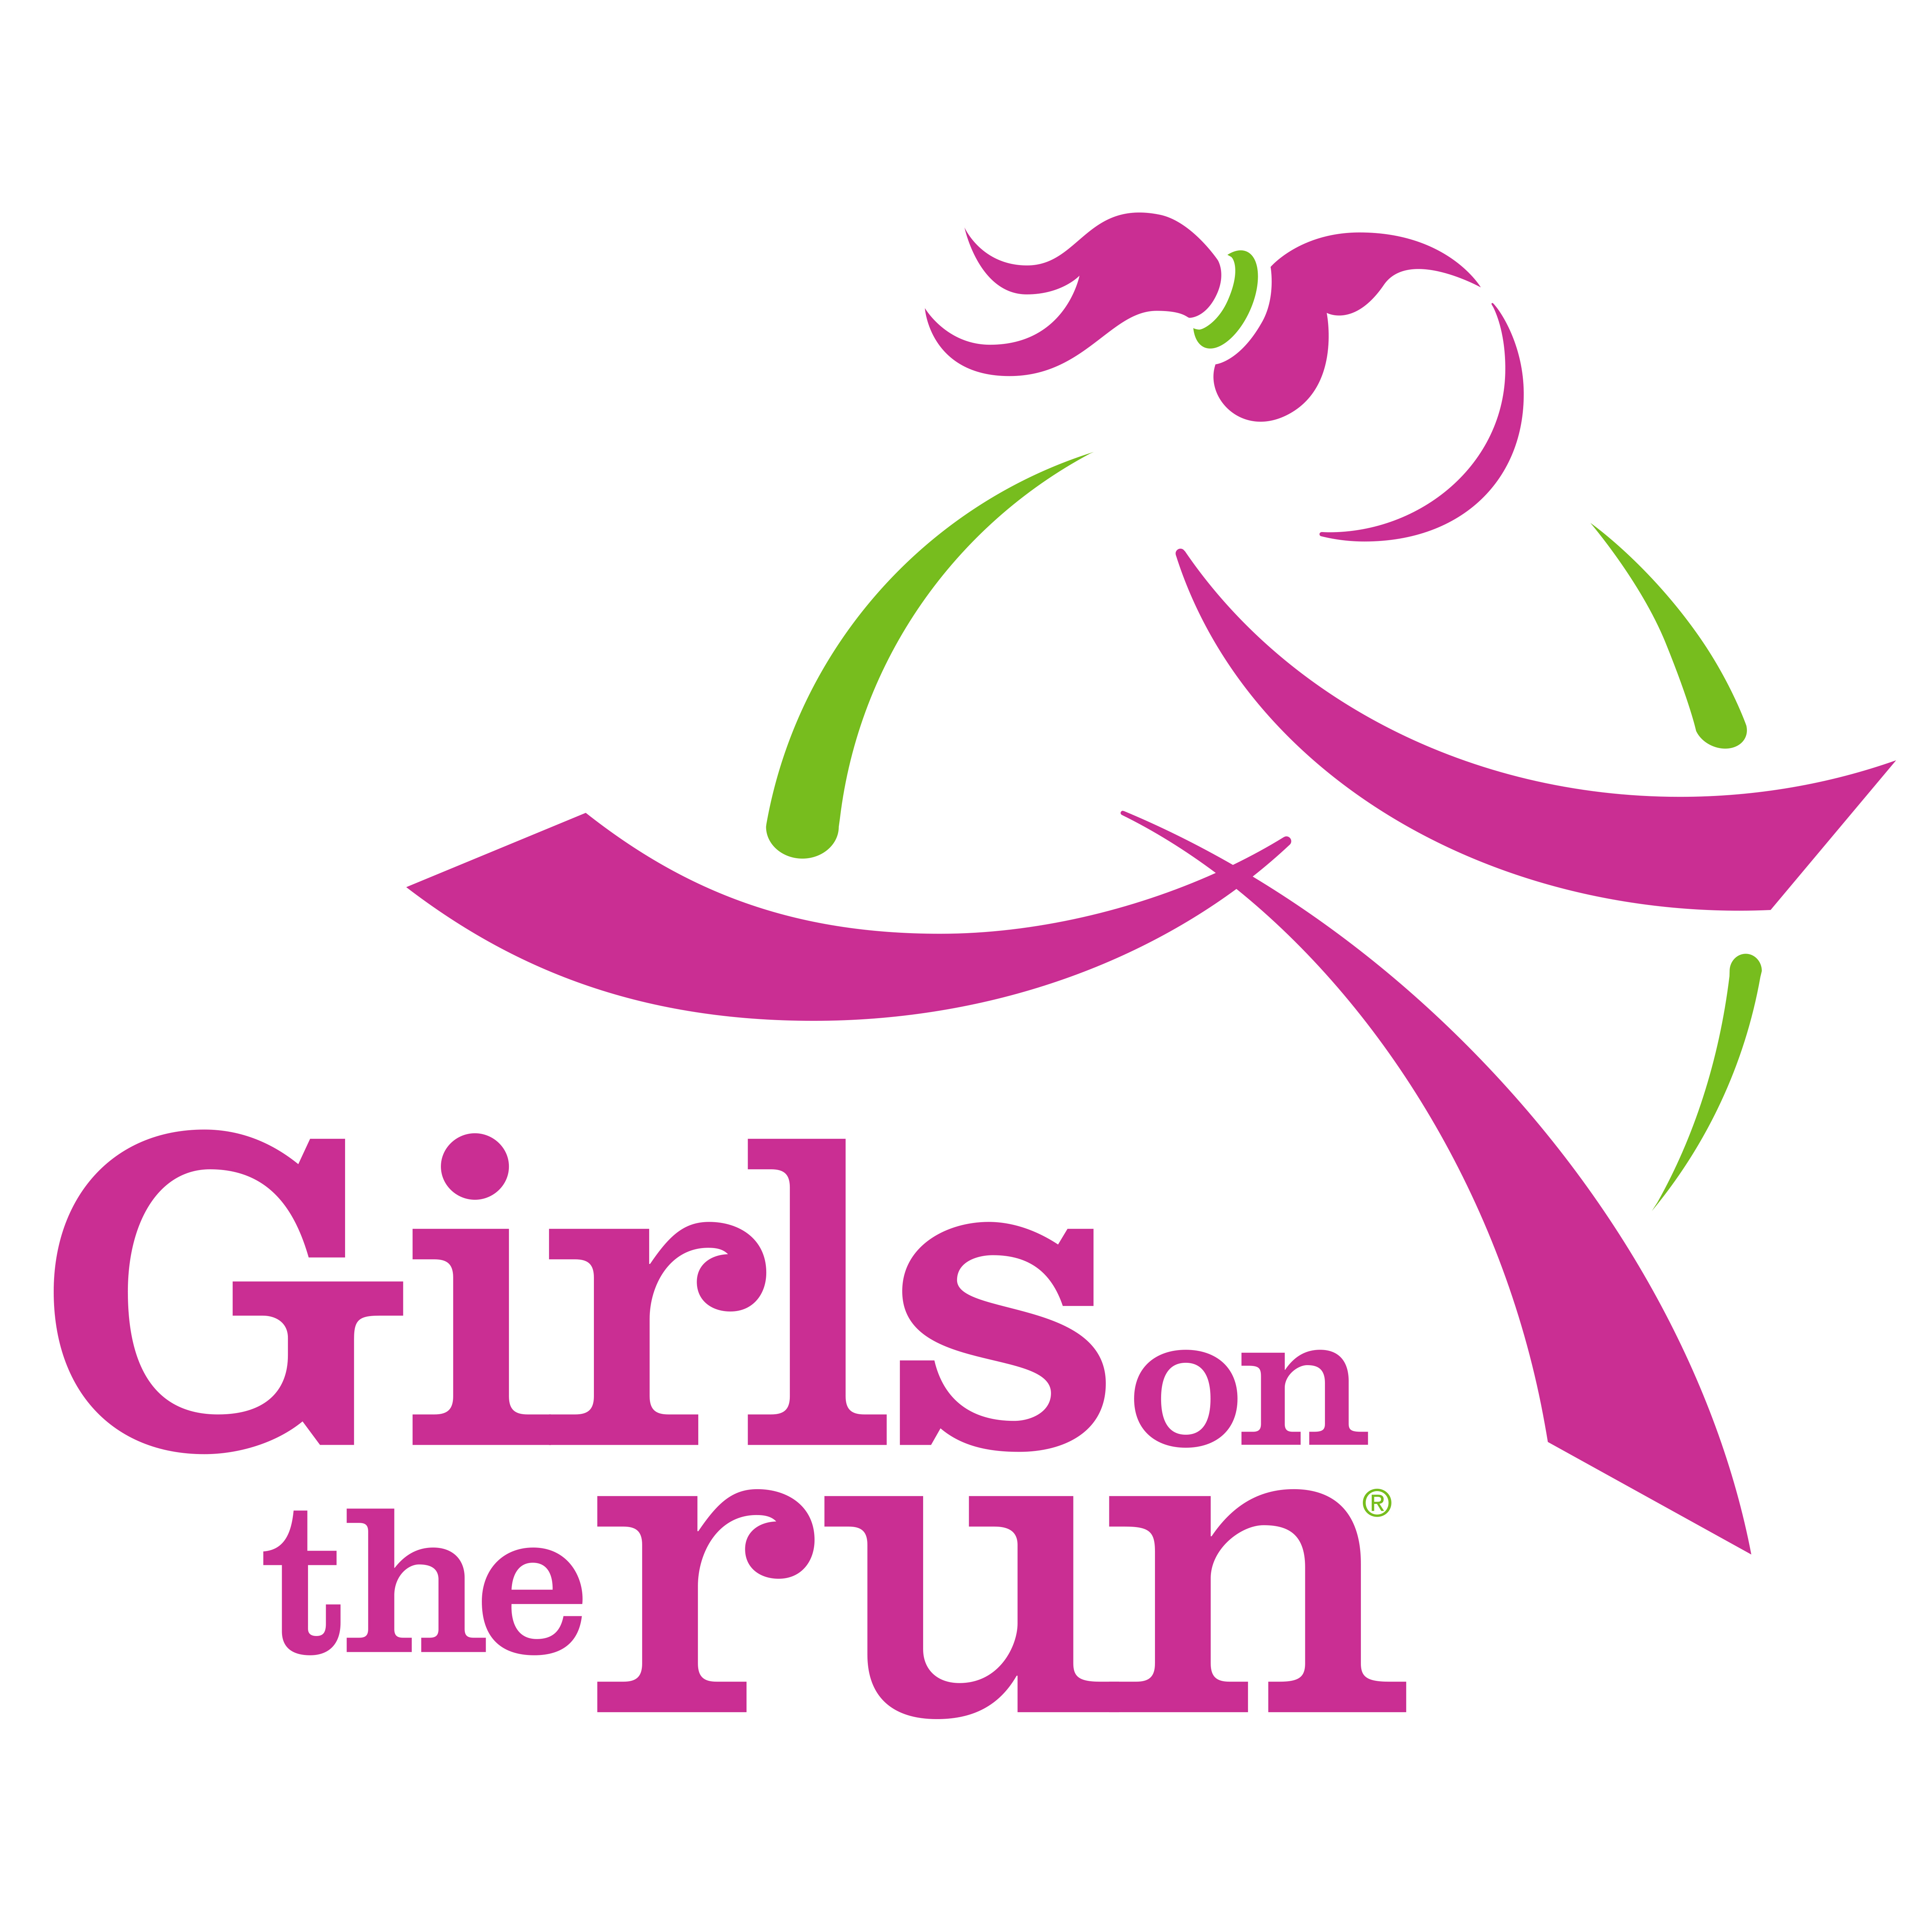 Thirty-One Gifts and Girls on the Run Announce National Partnership